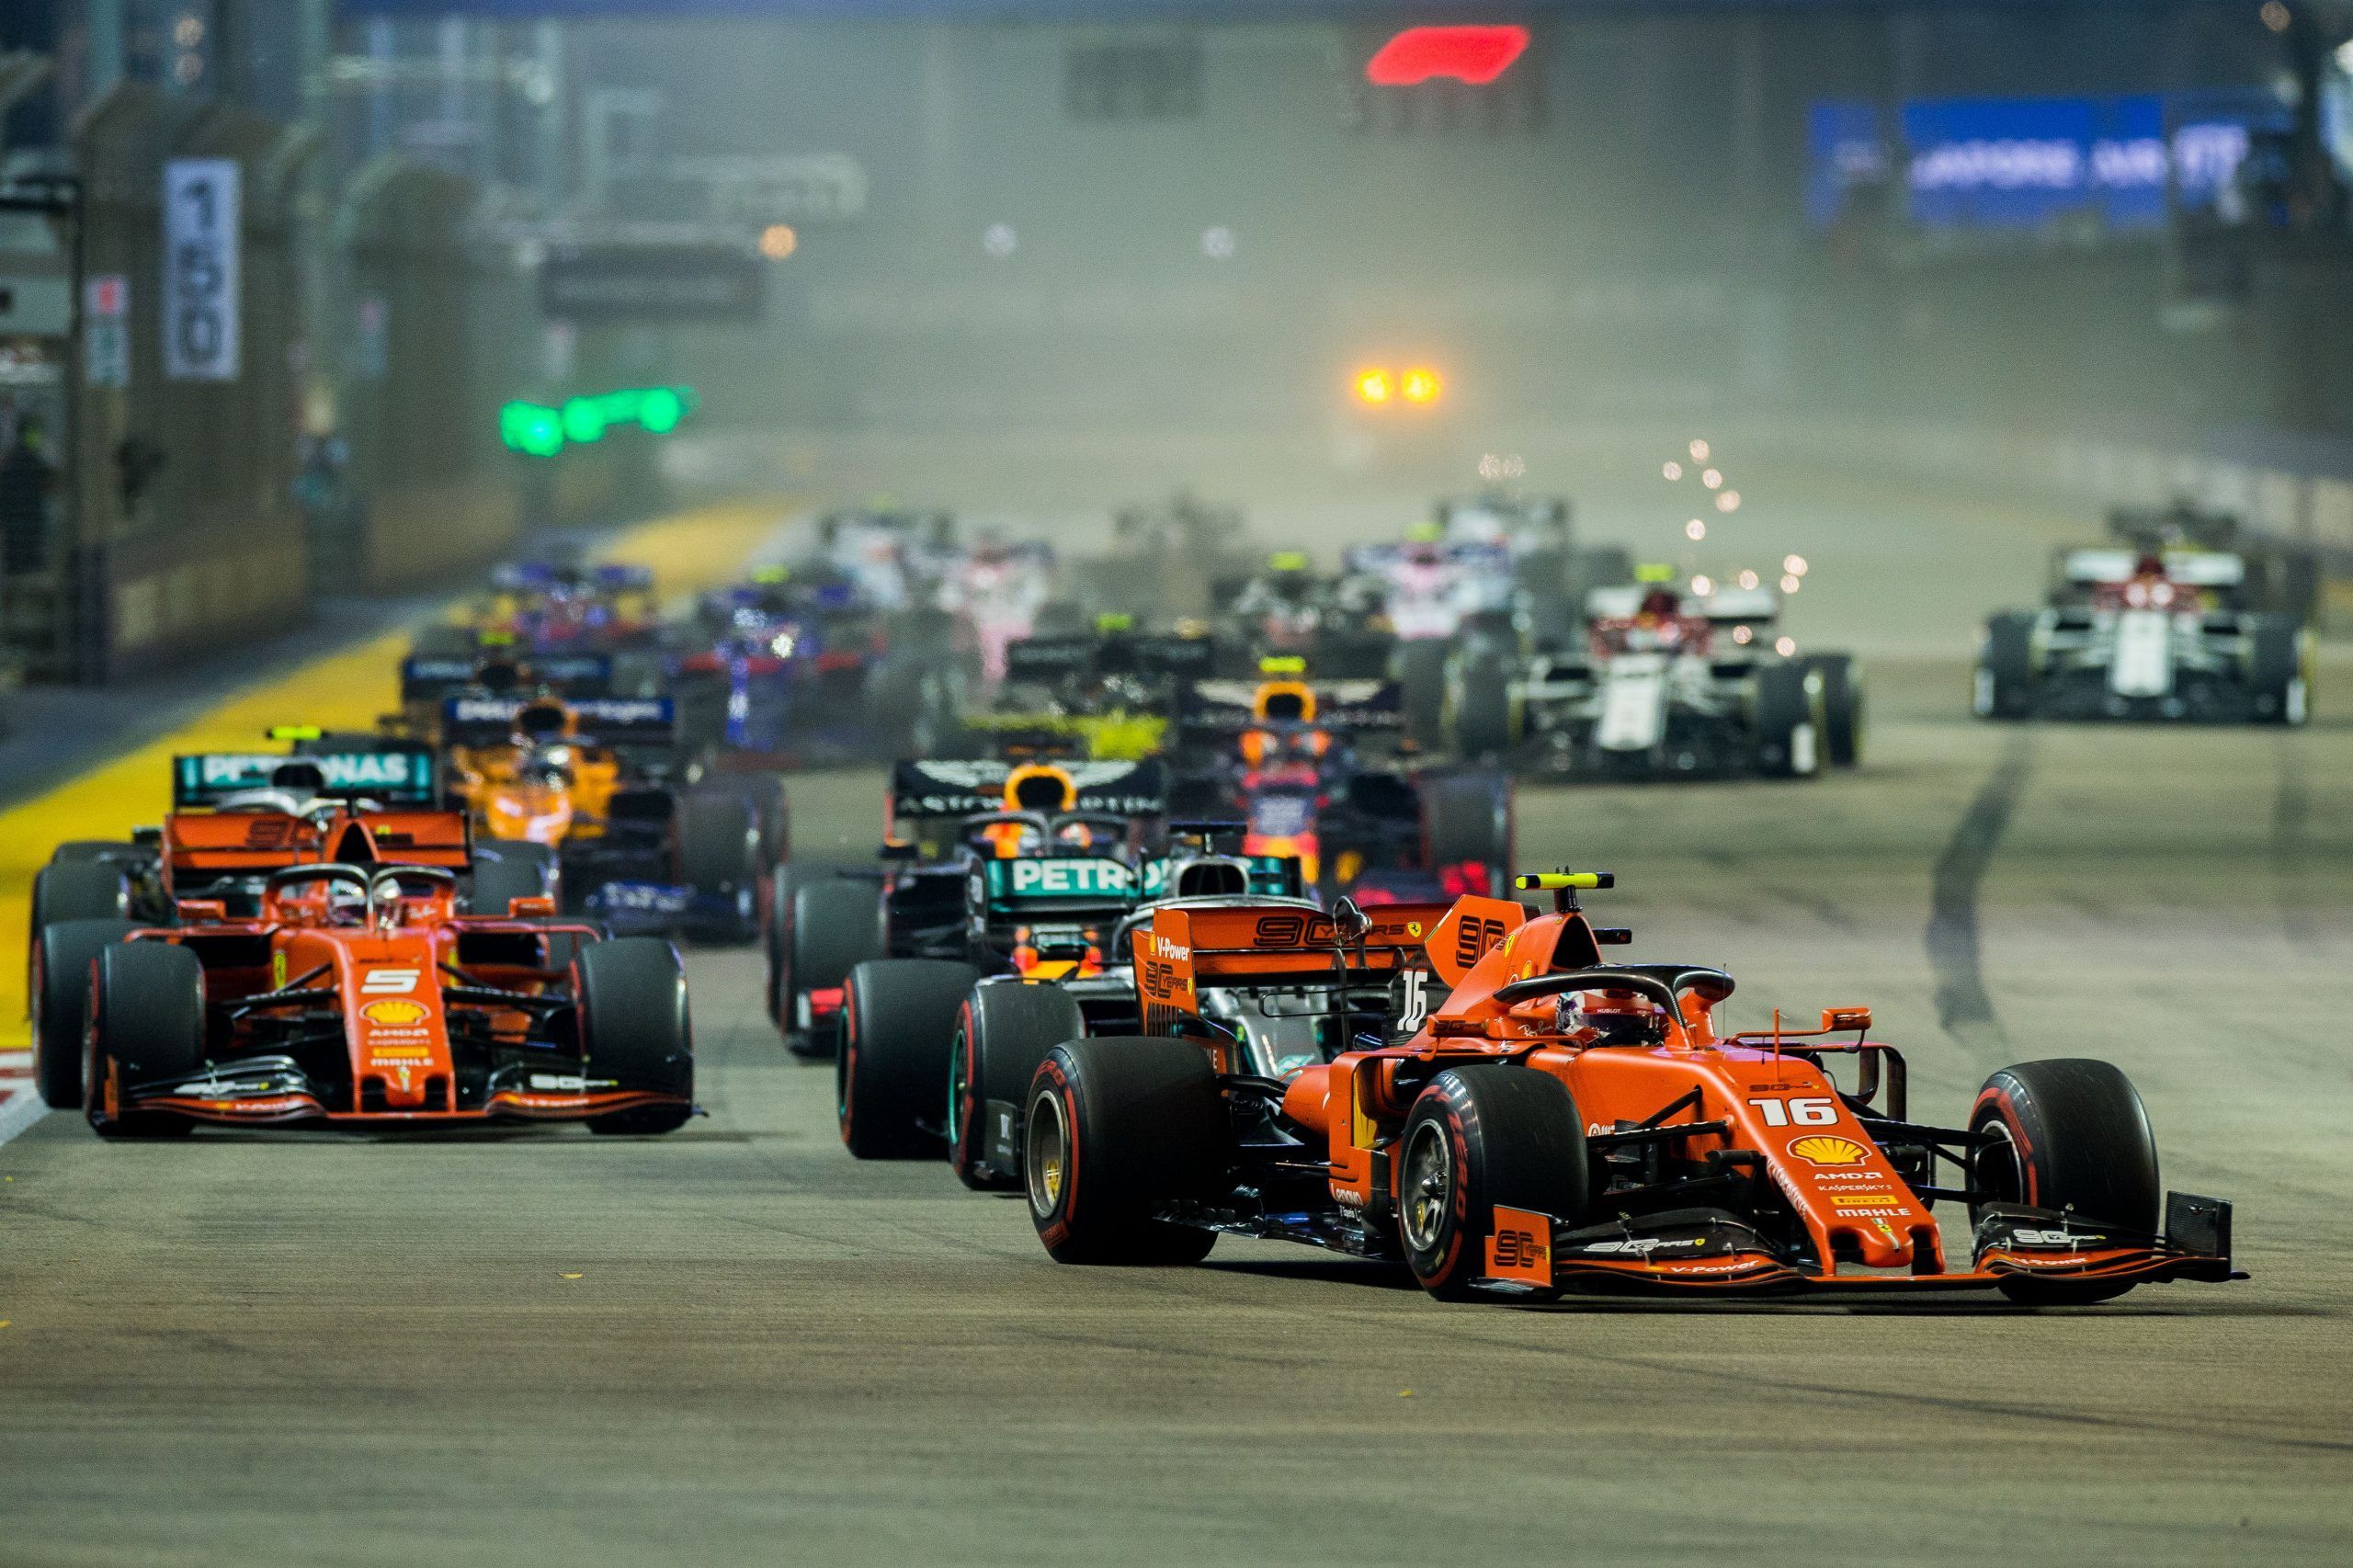 restaurants-and-bars-to-celebrate-the-return-of-formula-1-in-singapore